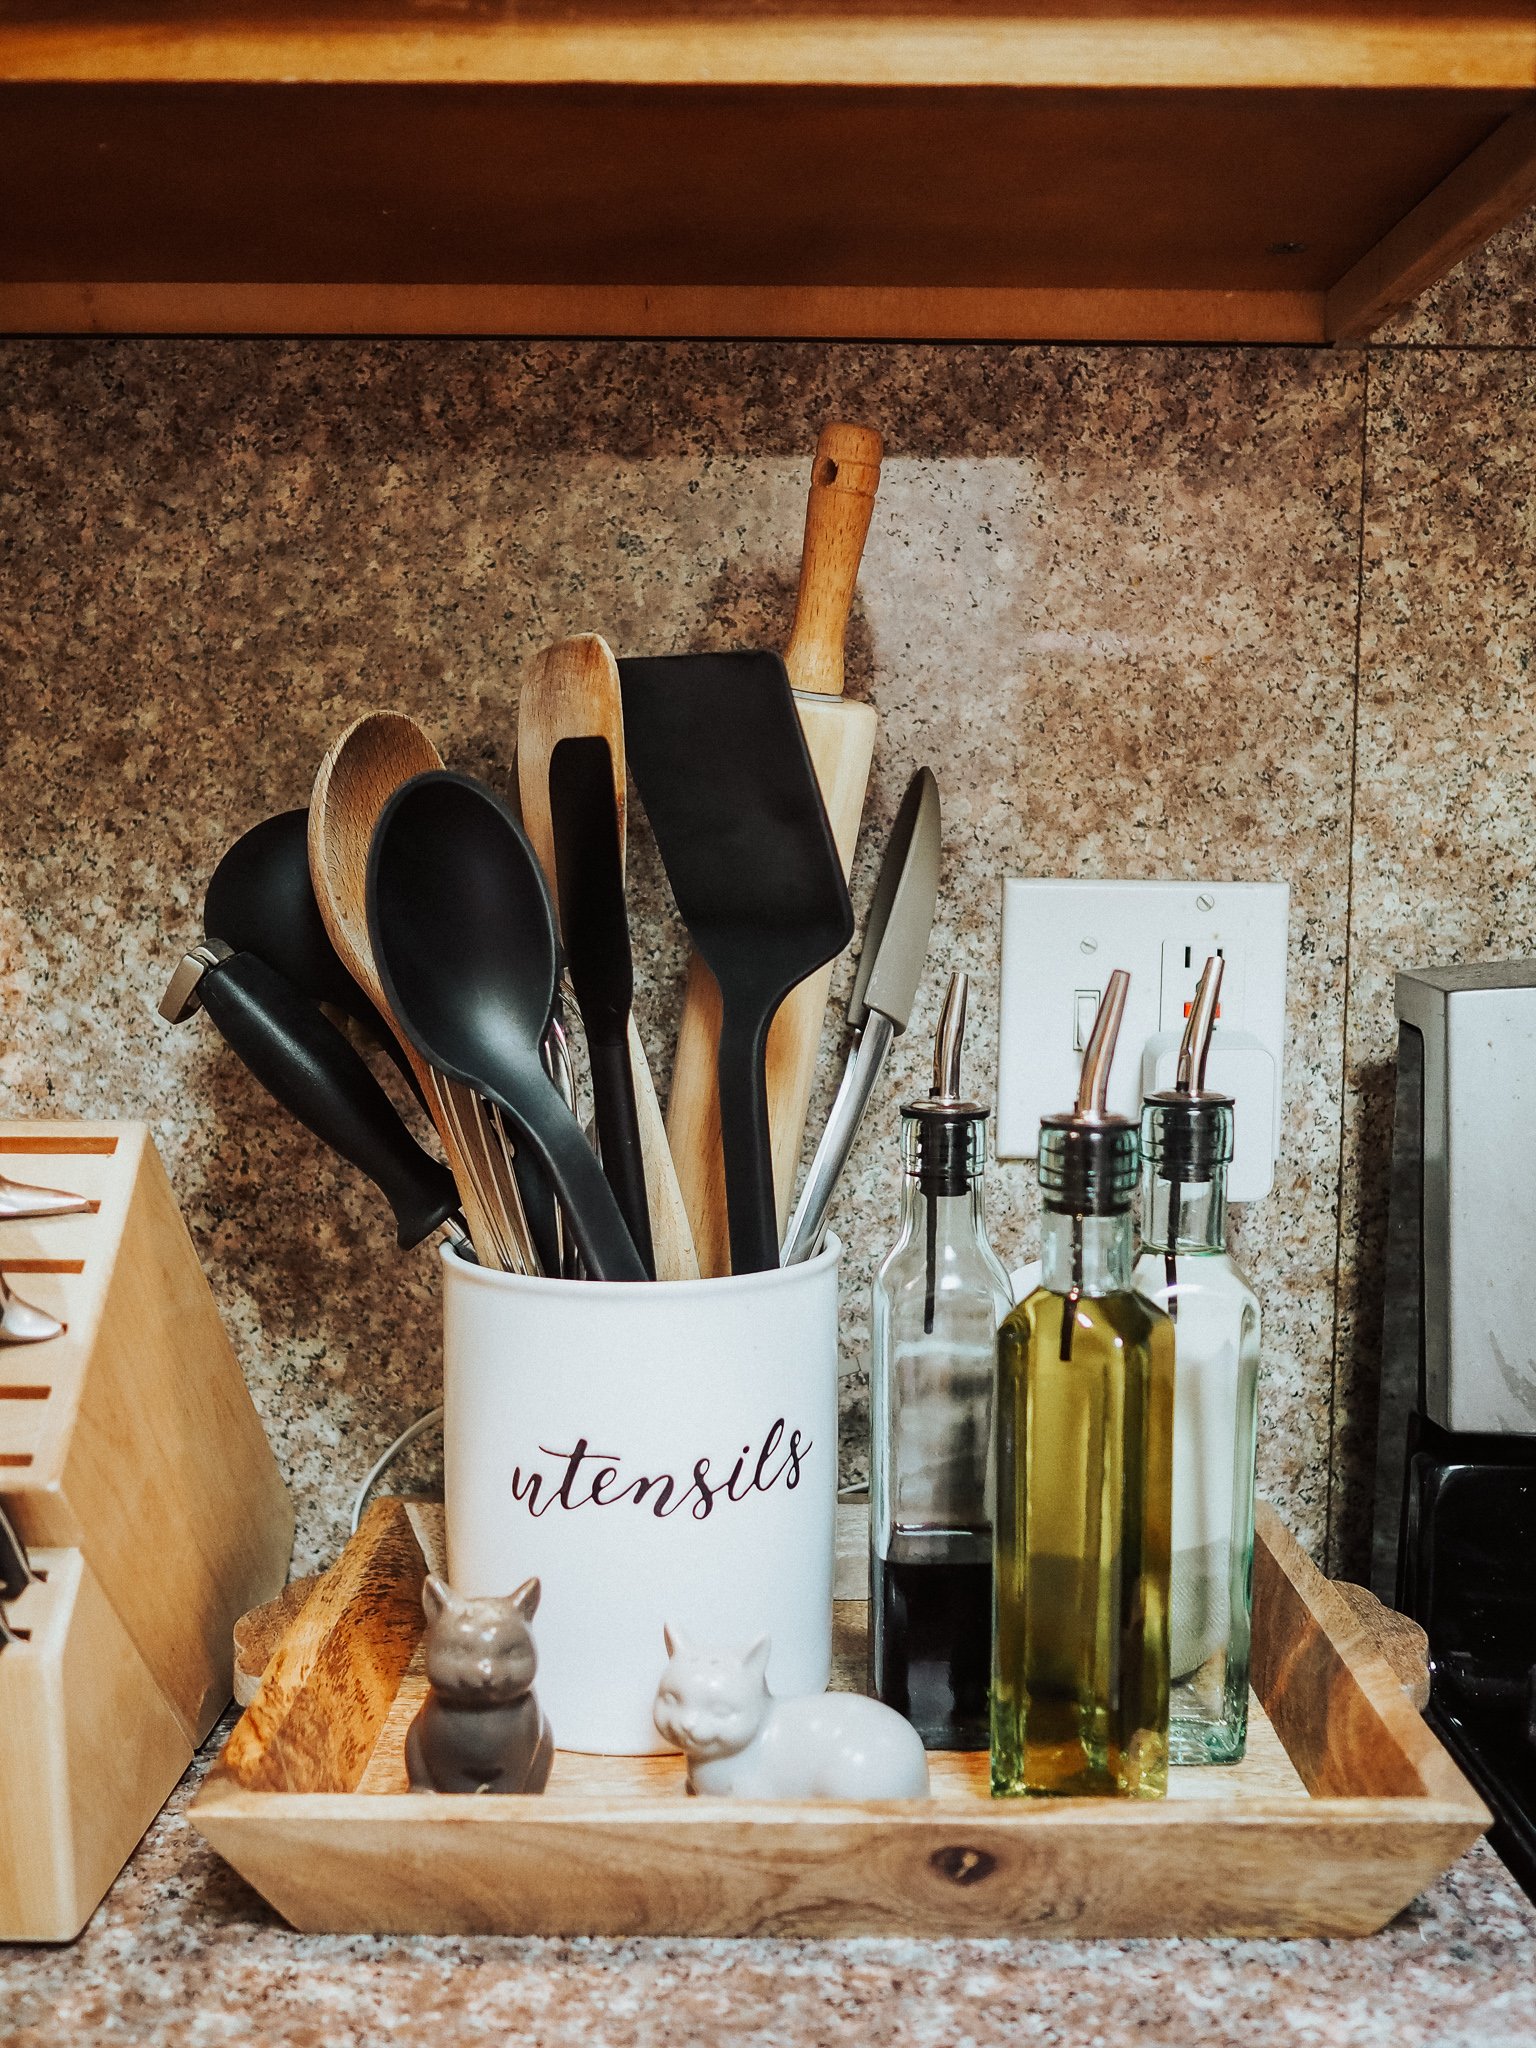 Lifestyle blogger Kelsey from Blondes & Bagels talks about easy ways to organize your kitchen. Read more for kitchen organization tips and tricks!